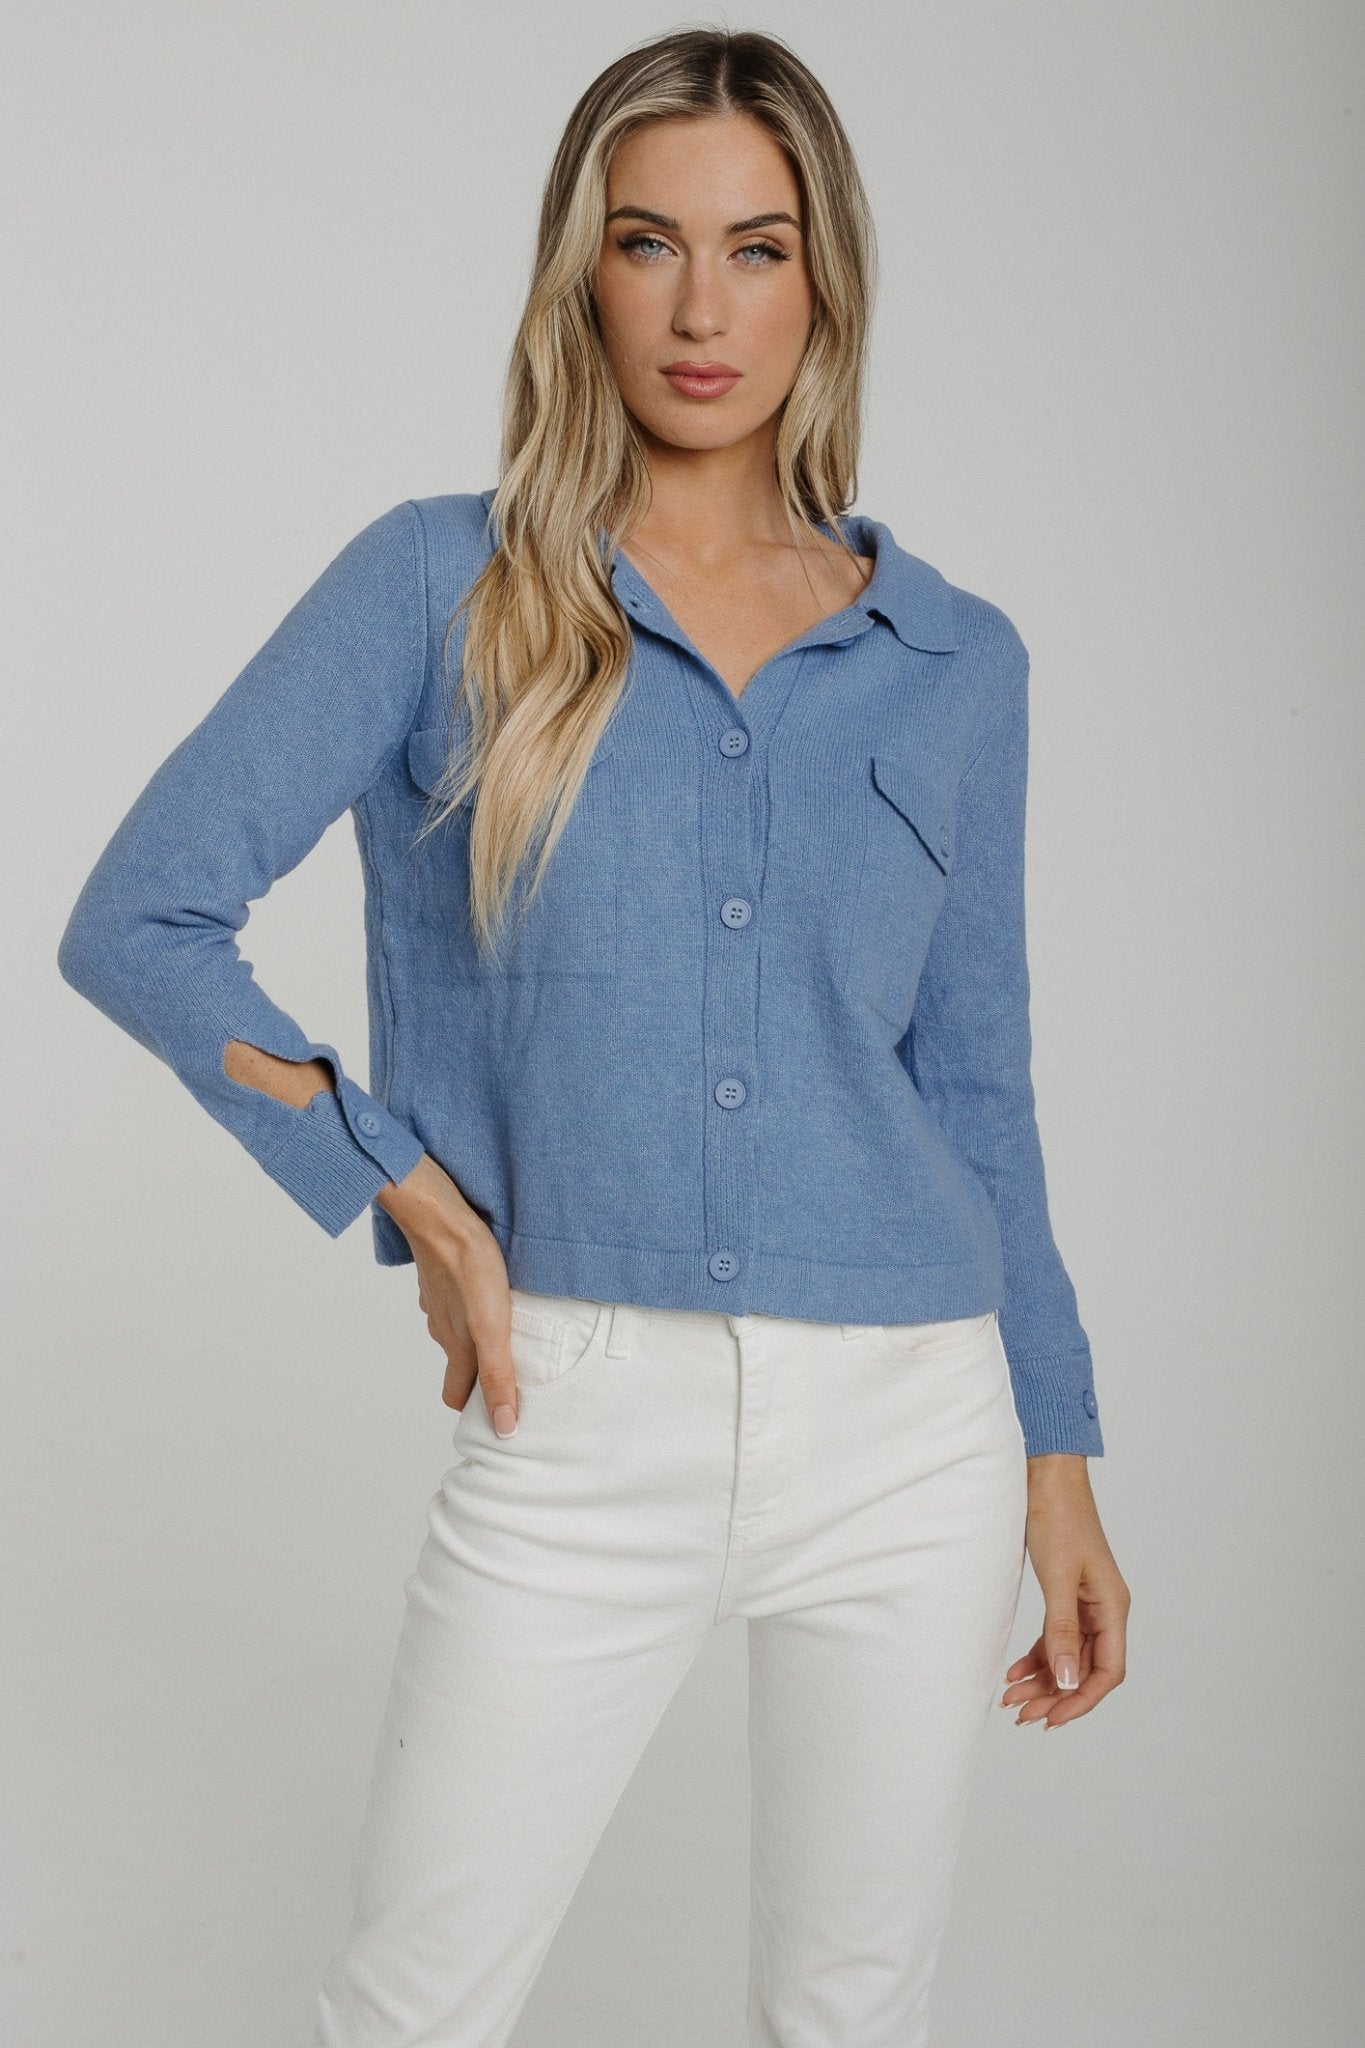 Sally Button Front Cardigan In Blue - The Walk in Wardrobe